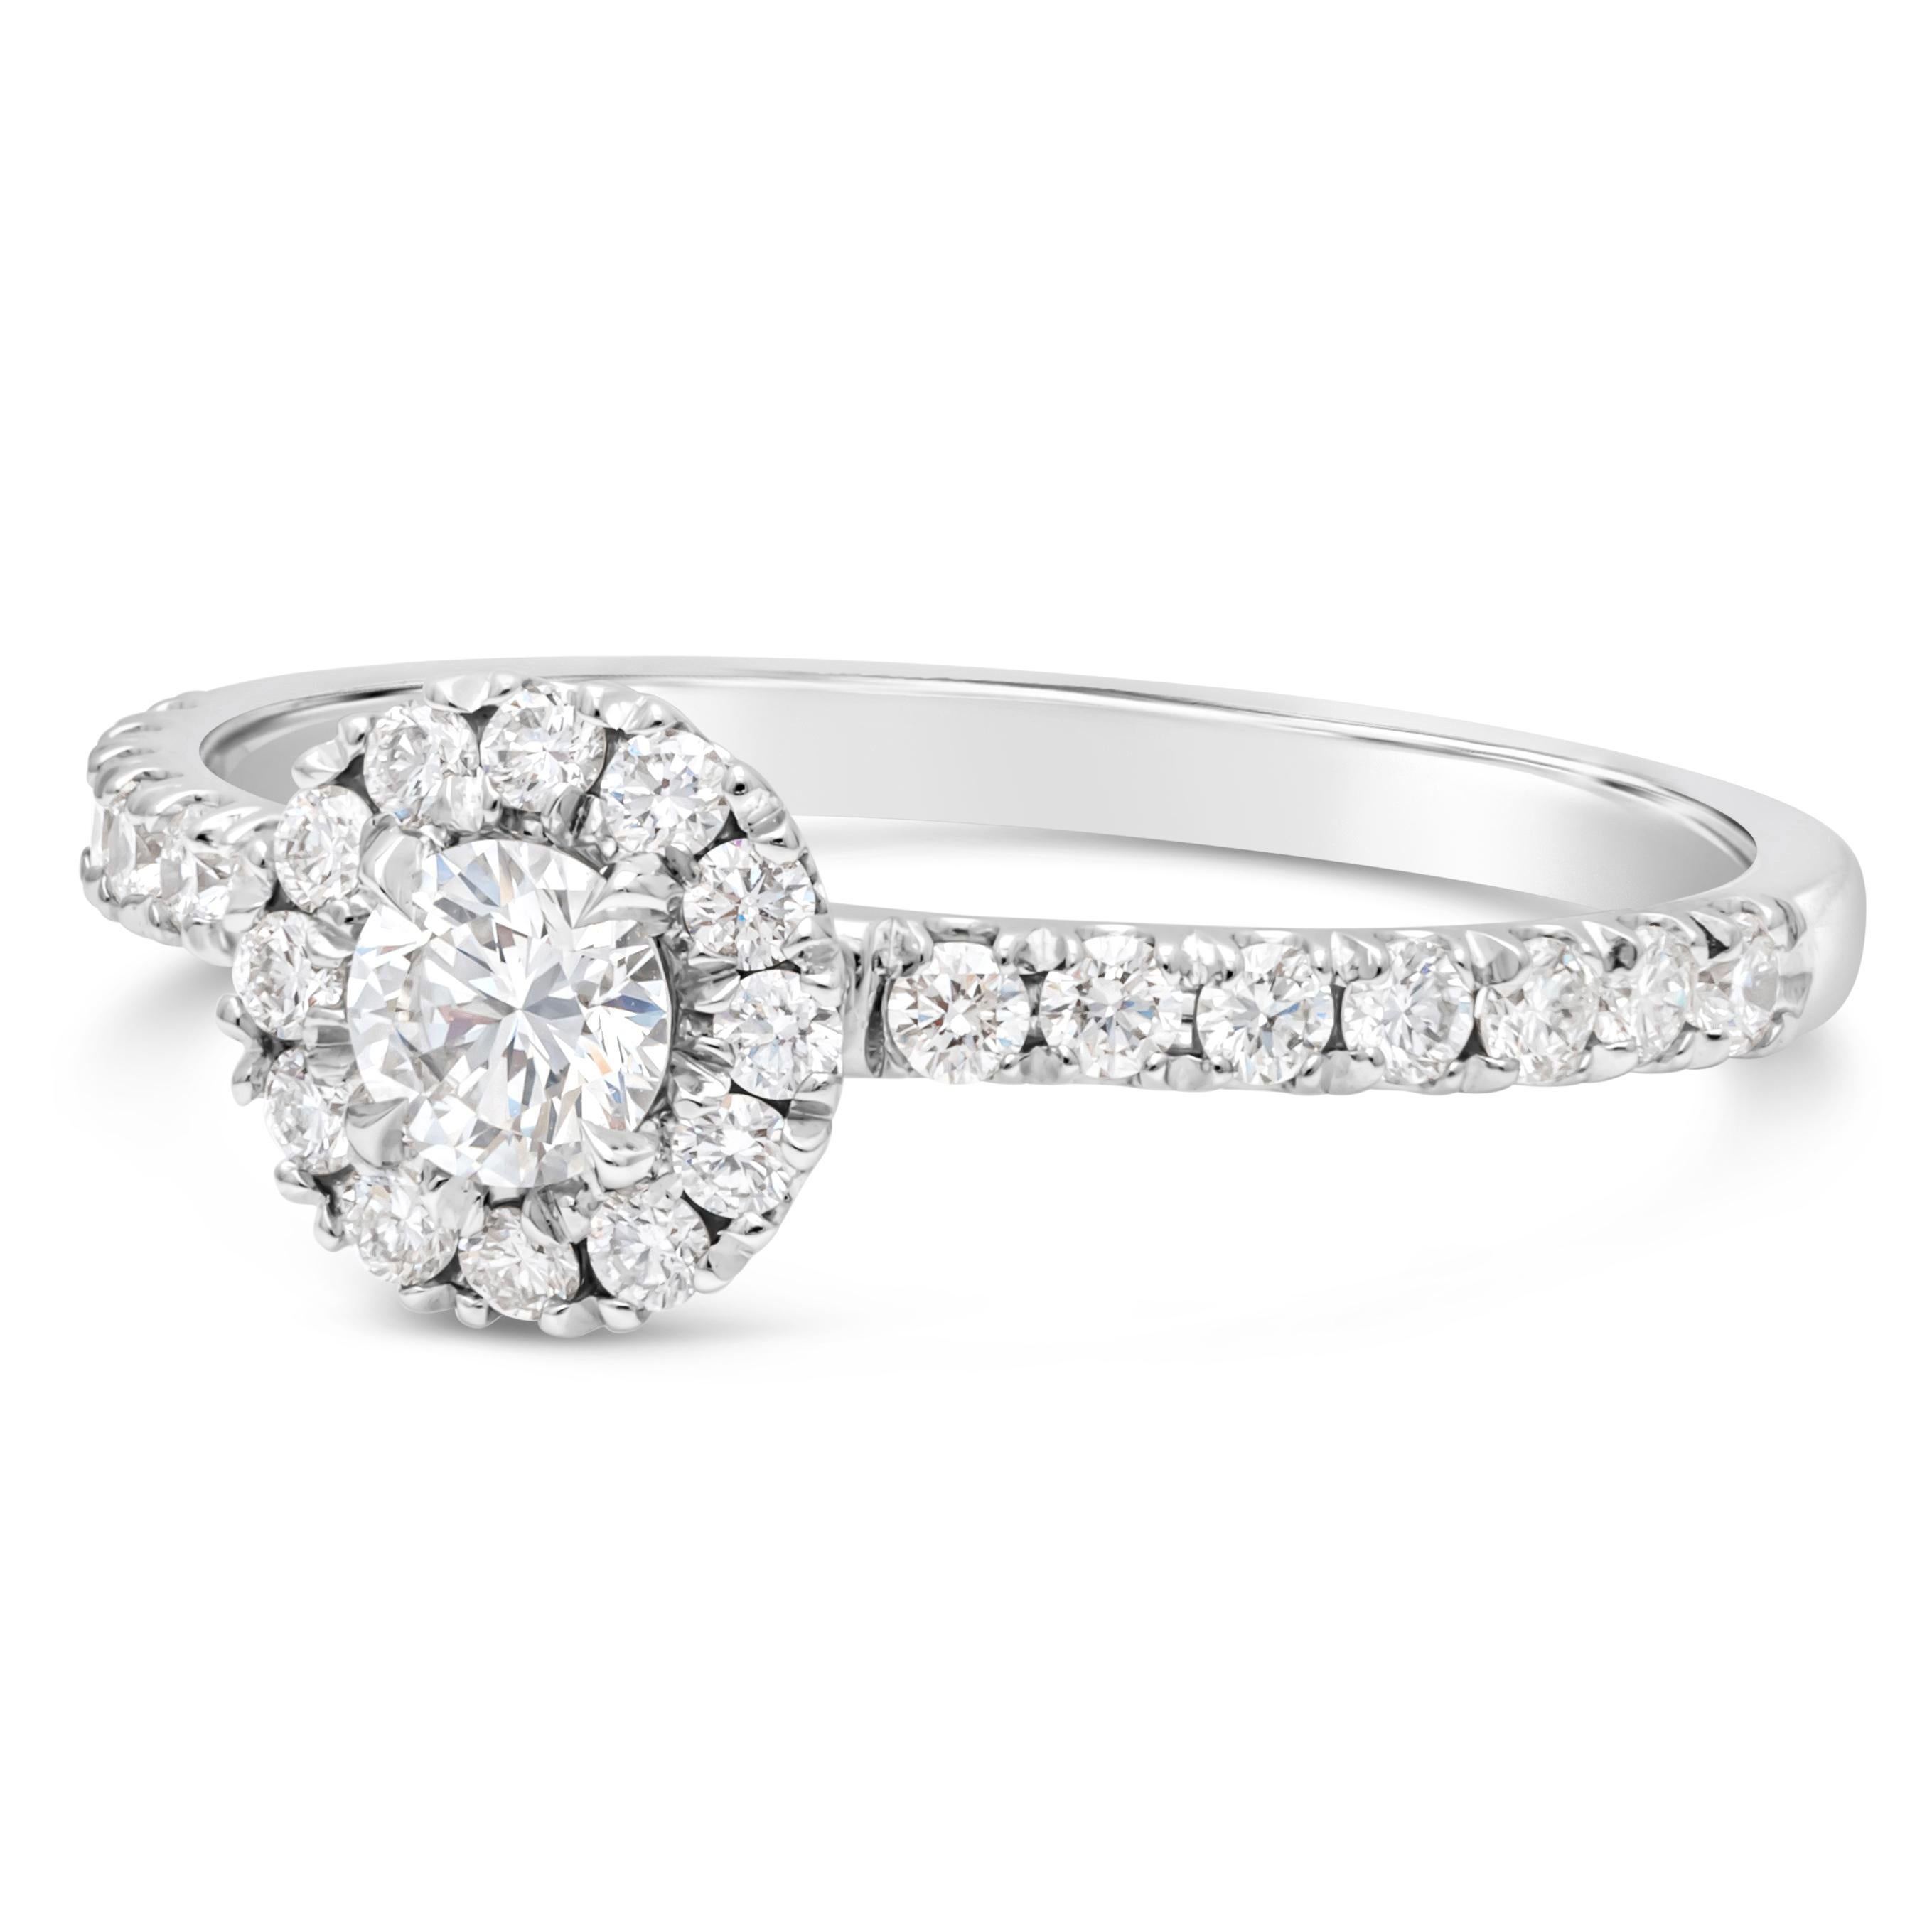 A classic engagement ring, showcasing a GIA certified 0.21 carat round brilliant cut diamond certified by GIA as F color and VS1 clarity. Surrounded by round brilliant cut diamonds in a halo setting and accented by a diamond encrusted shank in a